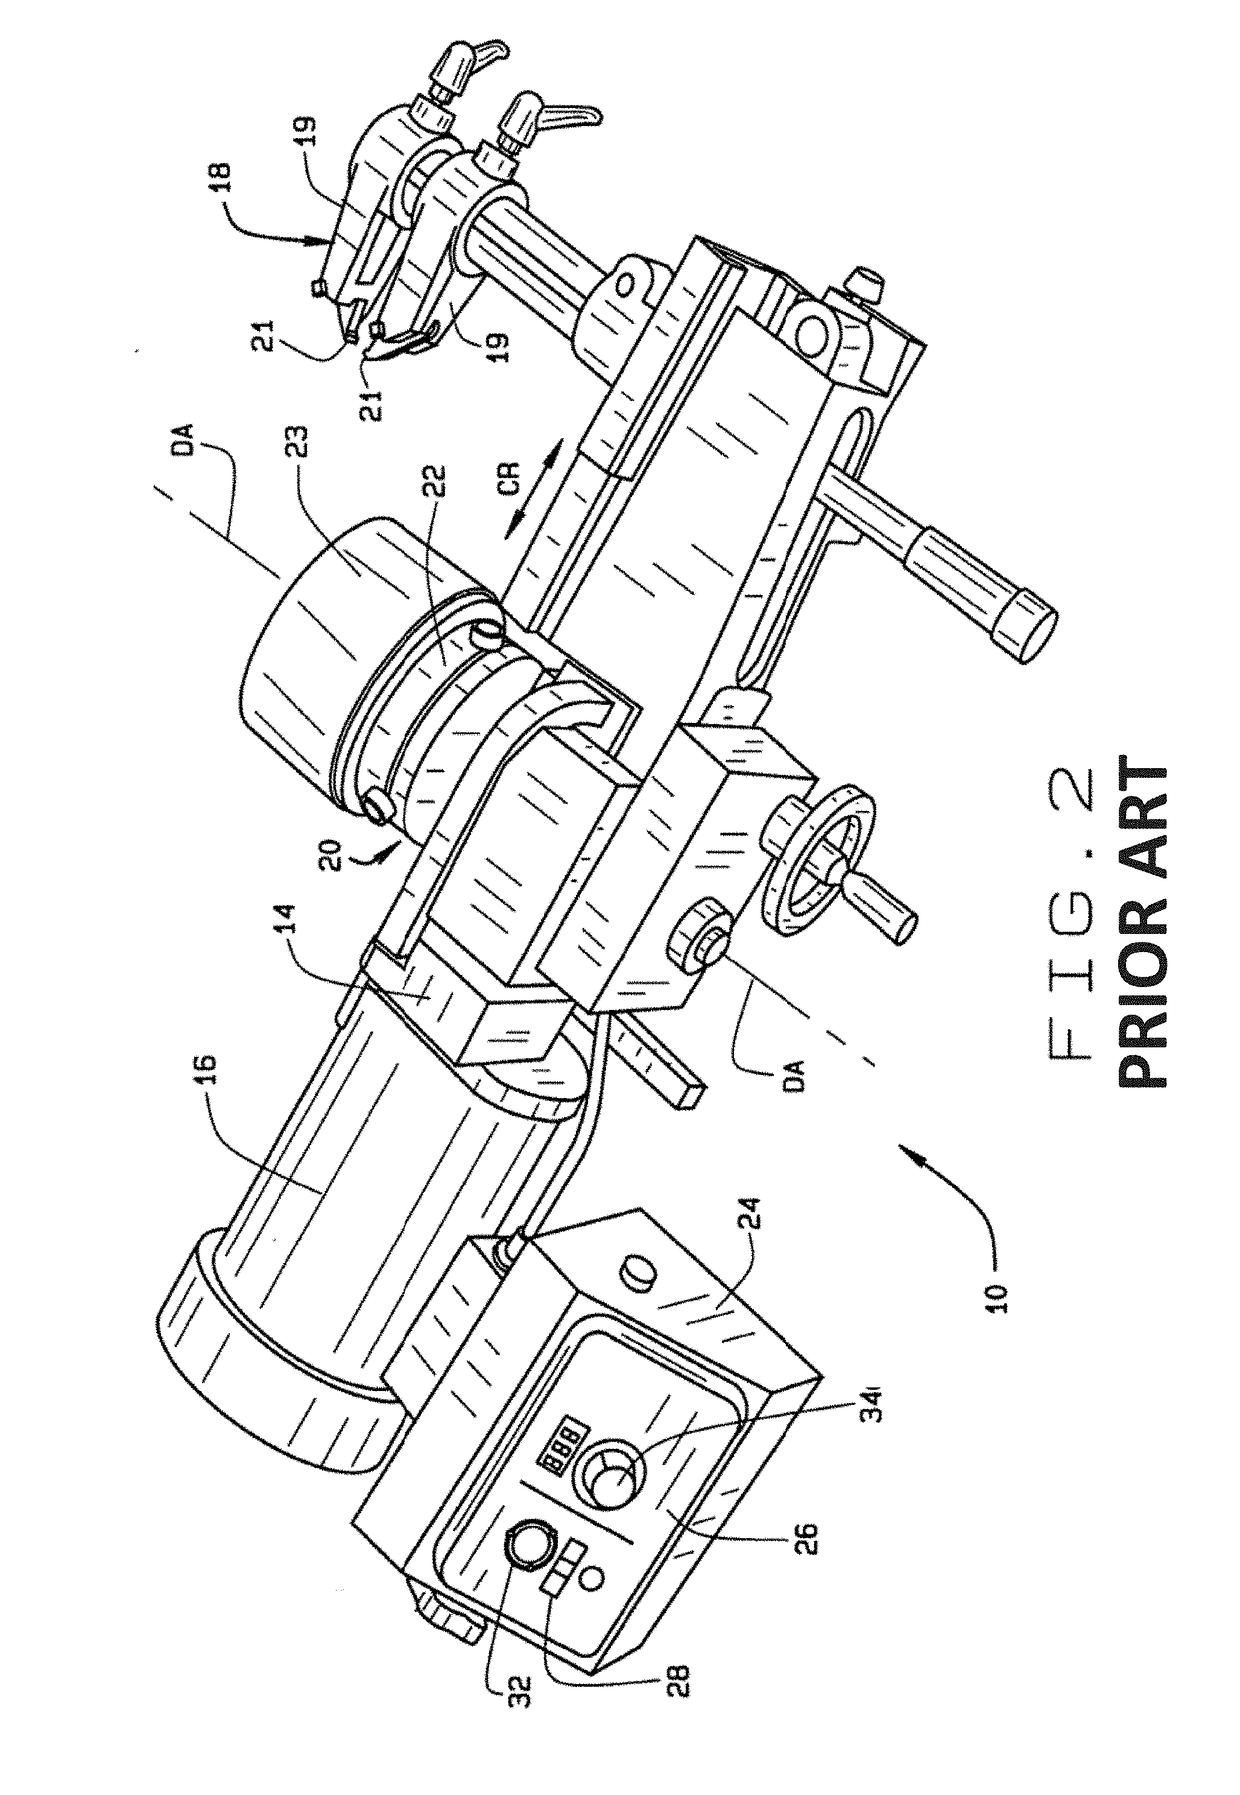 System and Method For Rotational Position Tracking Of Brake Lathe Adjustment Assembly